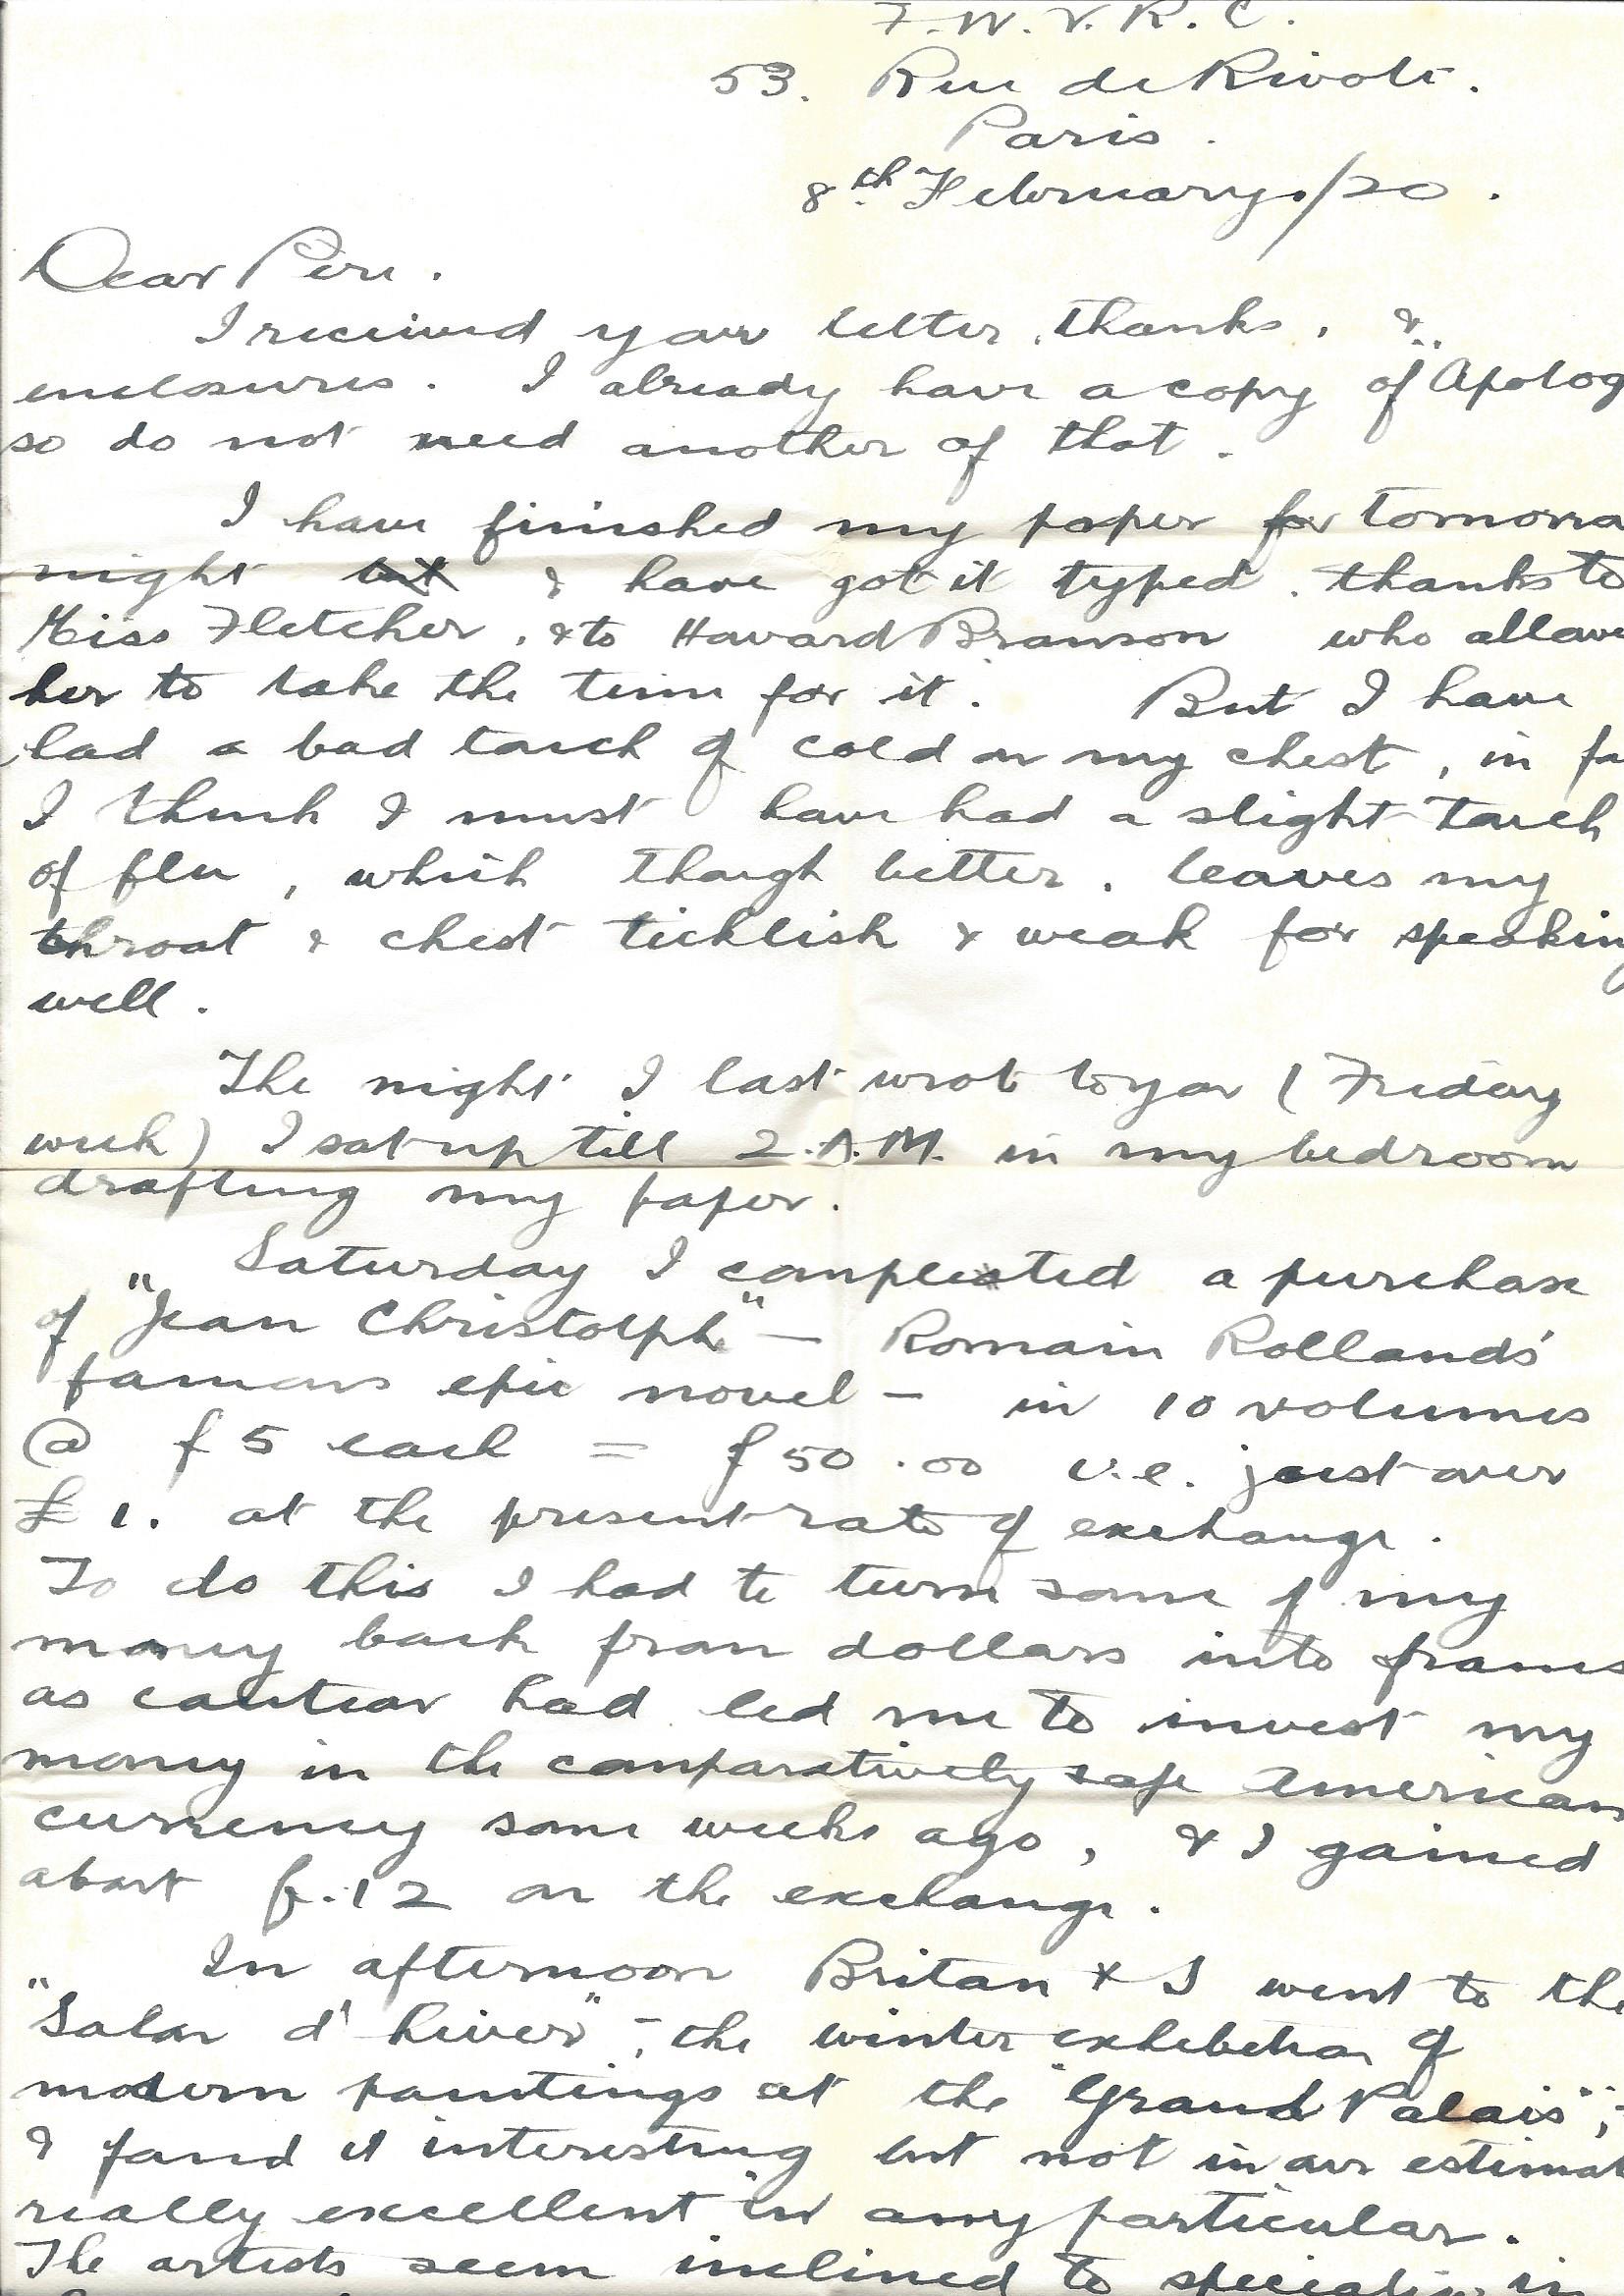 1920-02-08 page 2 letter by Donald Bearman